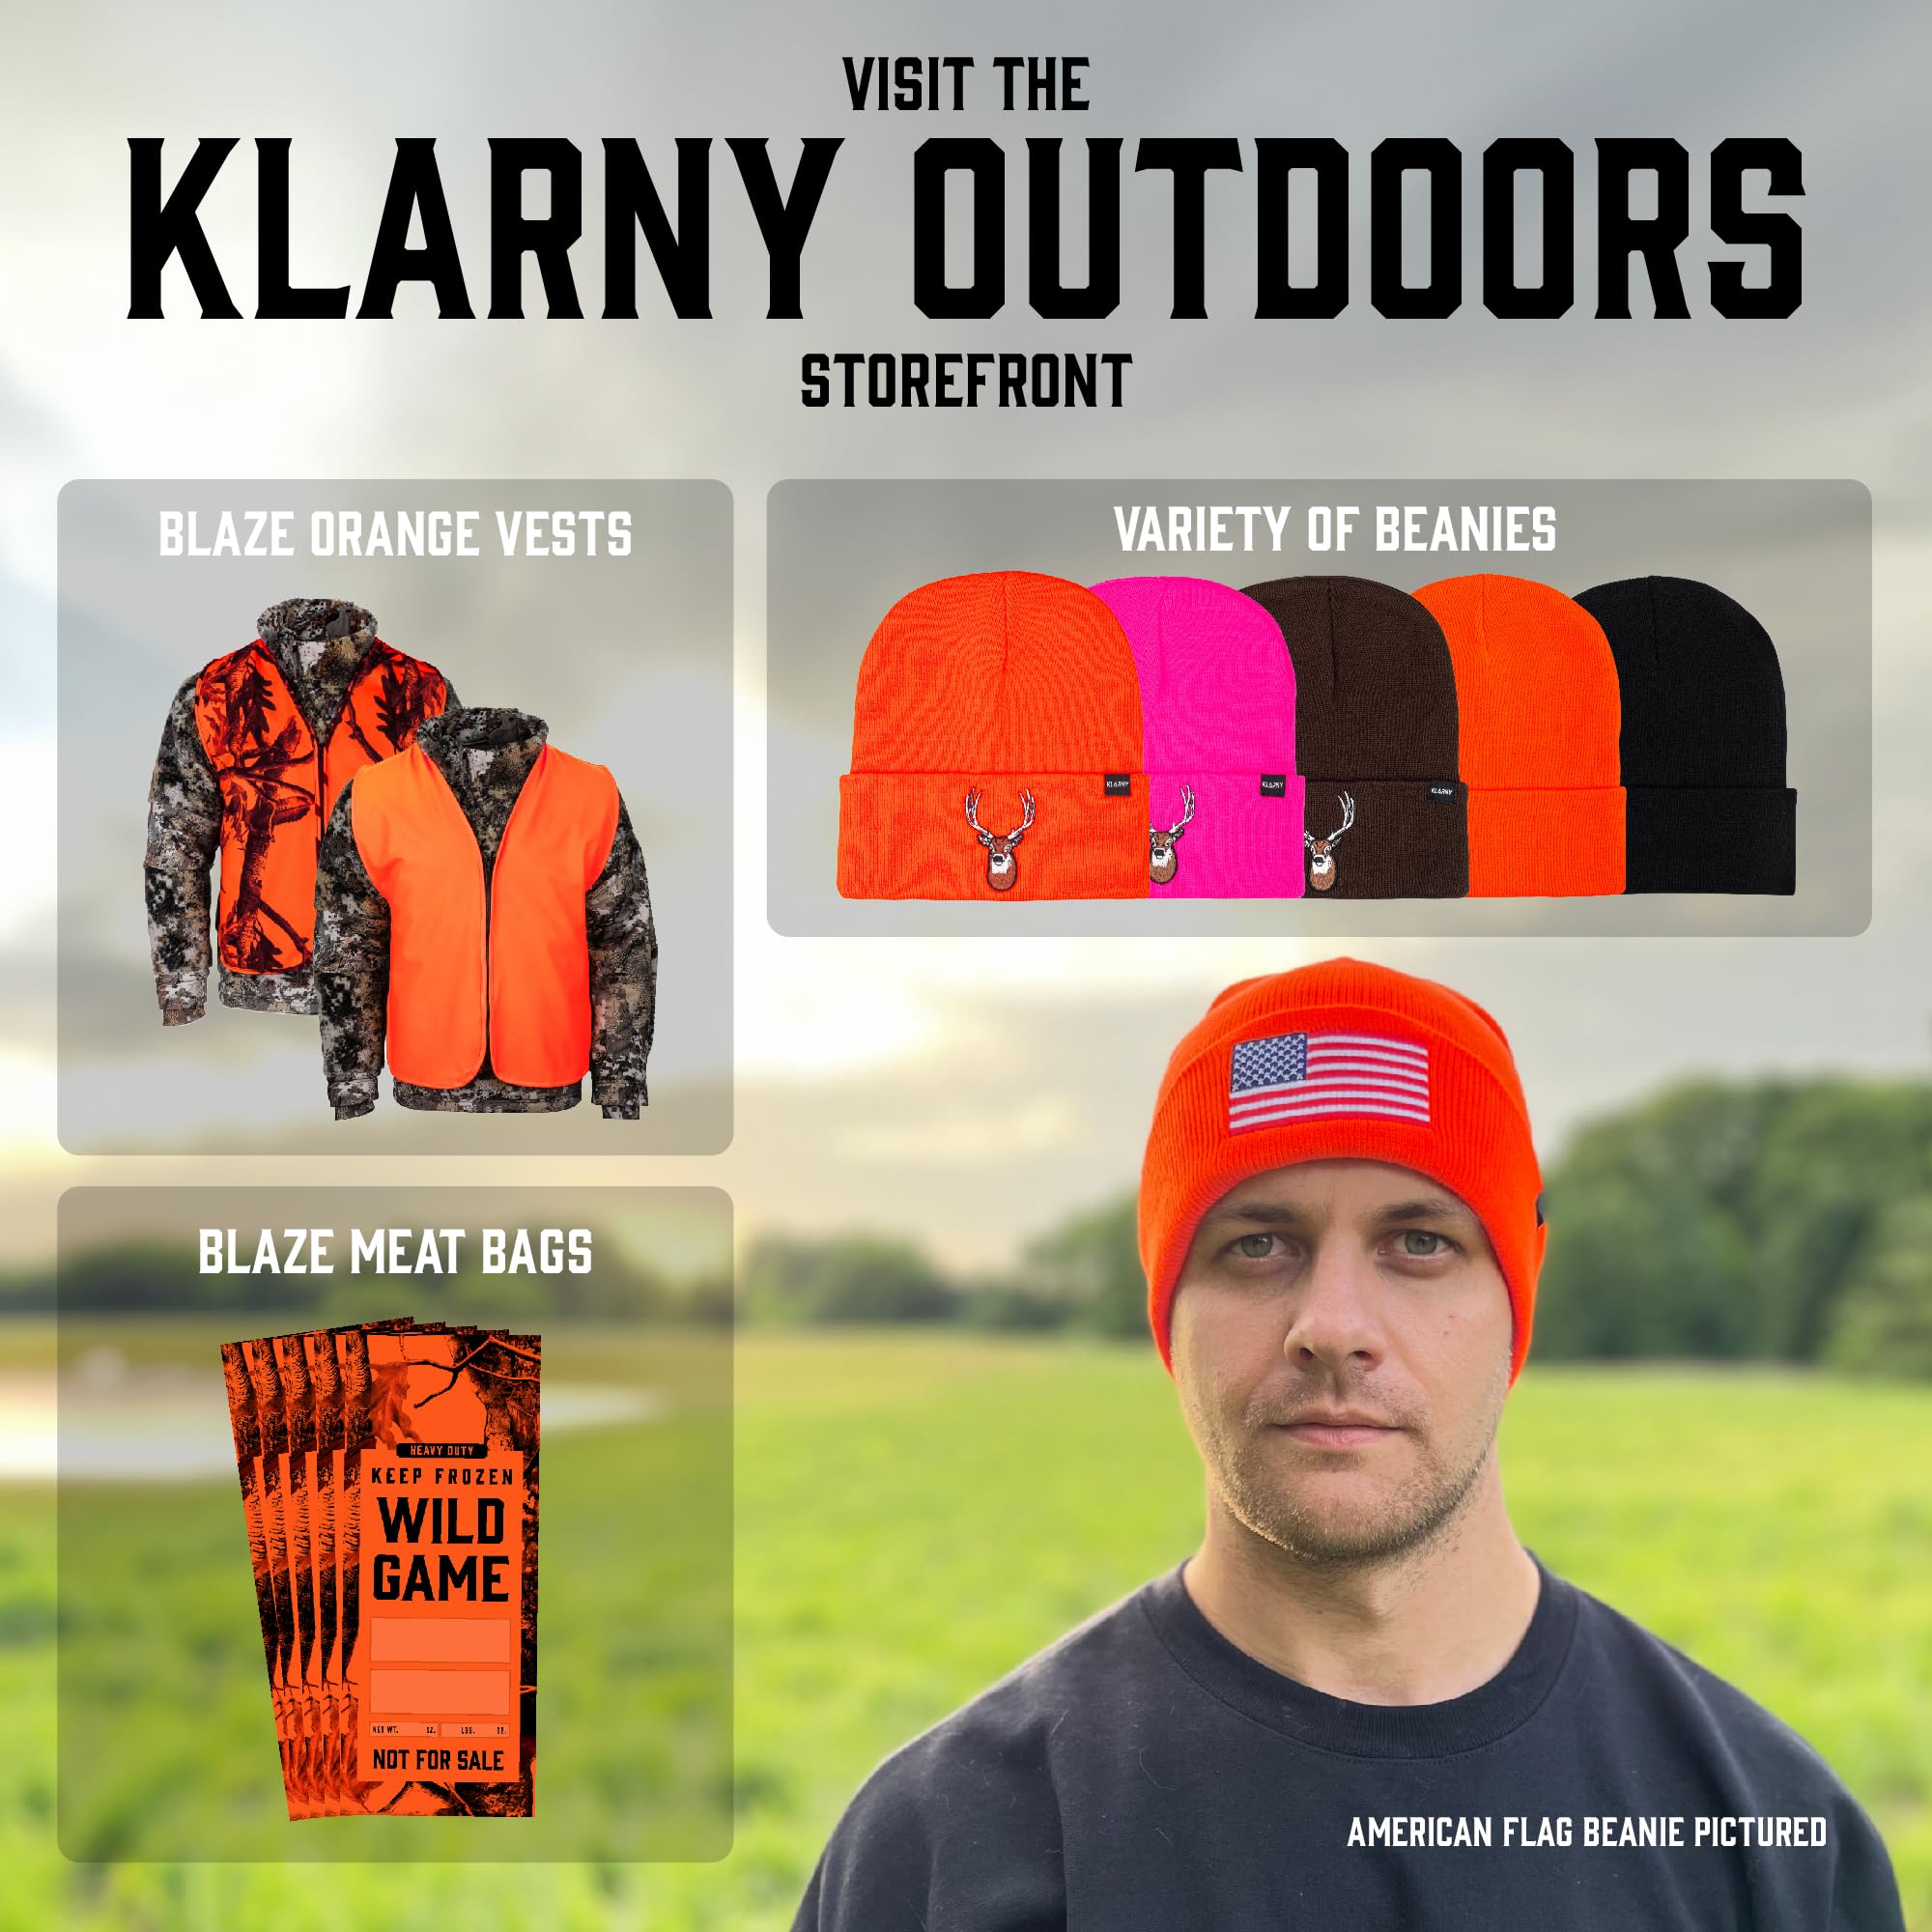 Klarny Blaze Orange Hunting Hat for Men, Women, Kids, High-Visibility Orange Hunting Beanie, Comfortable, Stretchy Knit Hunter Orange Hat Deer & Bow Hunting Gear, Safety Accessories, One Size